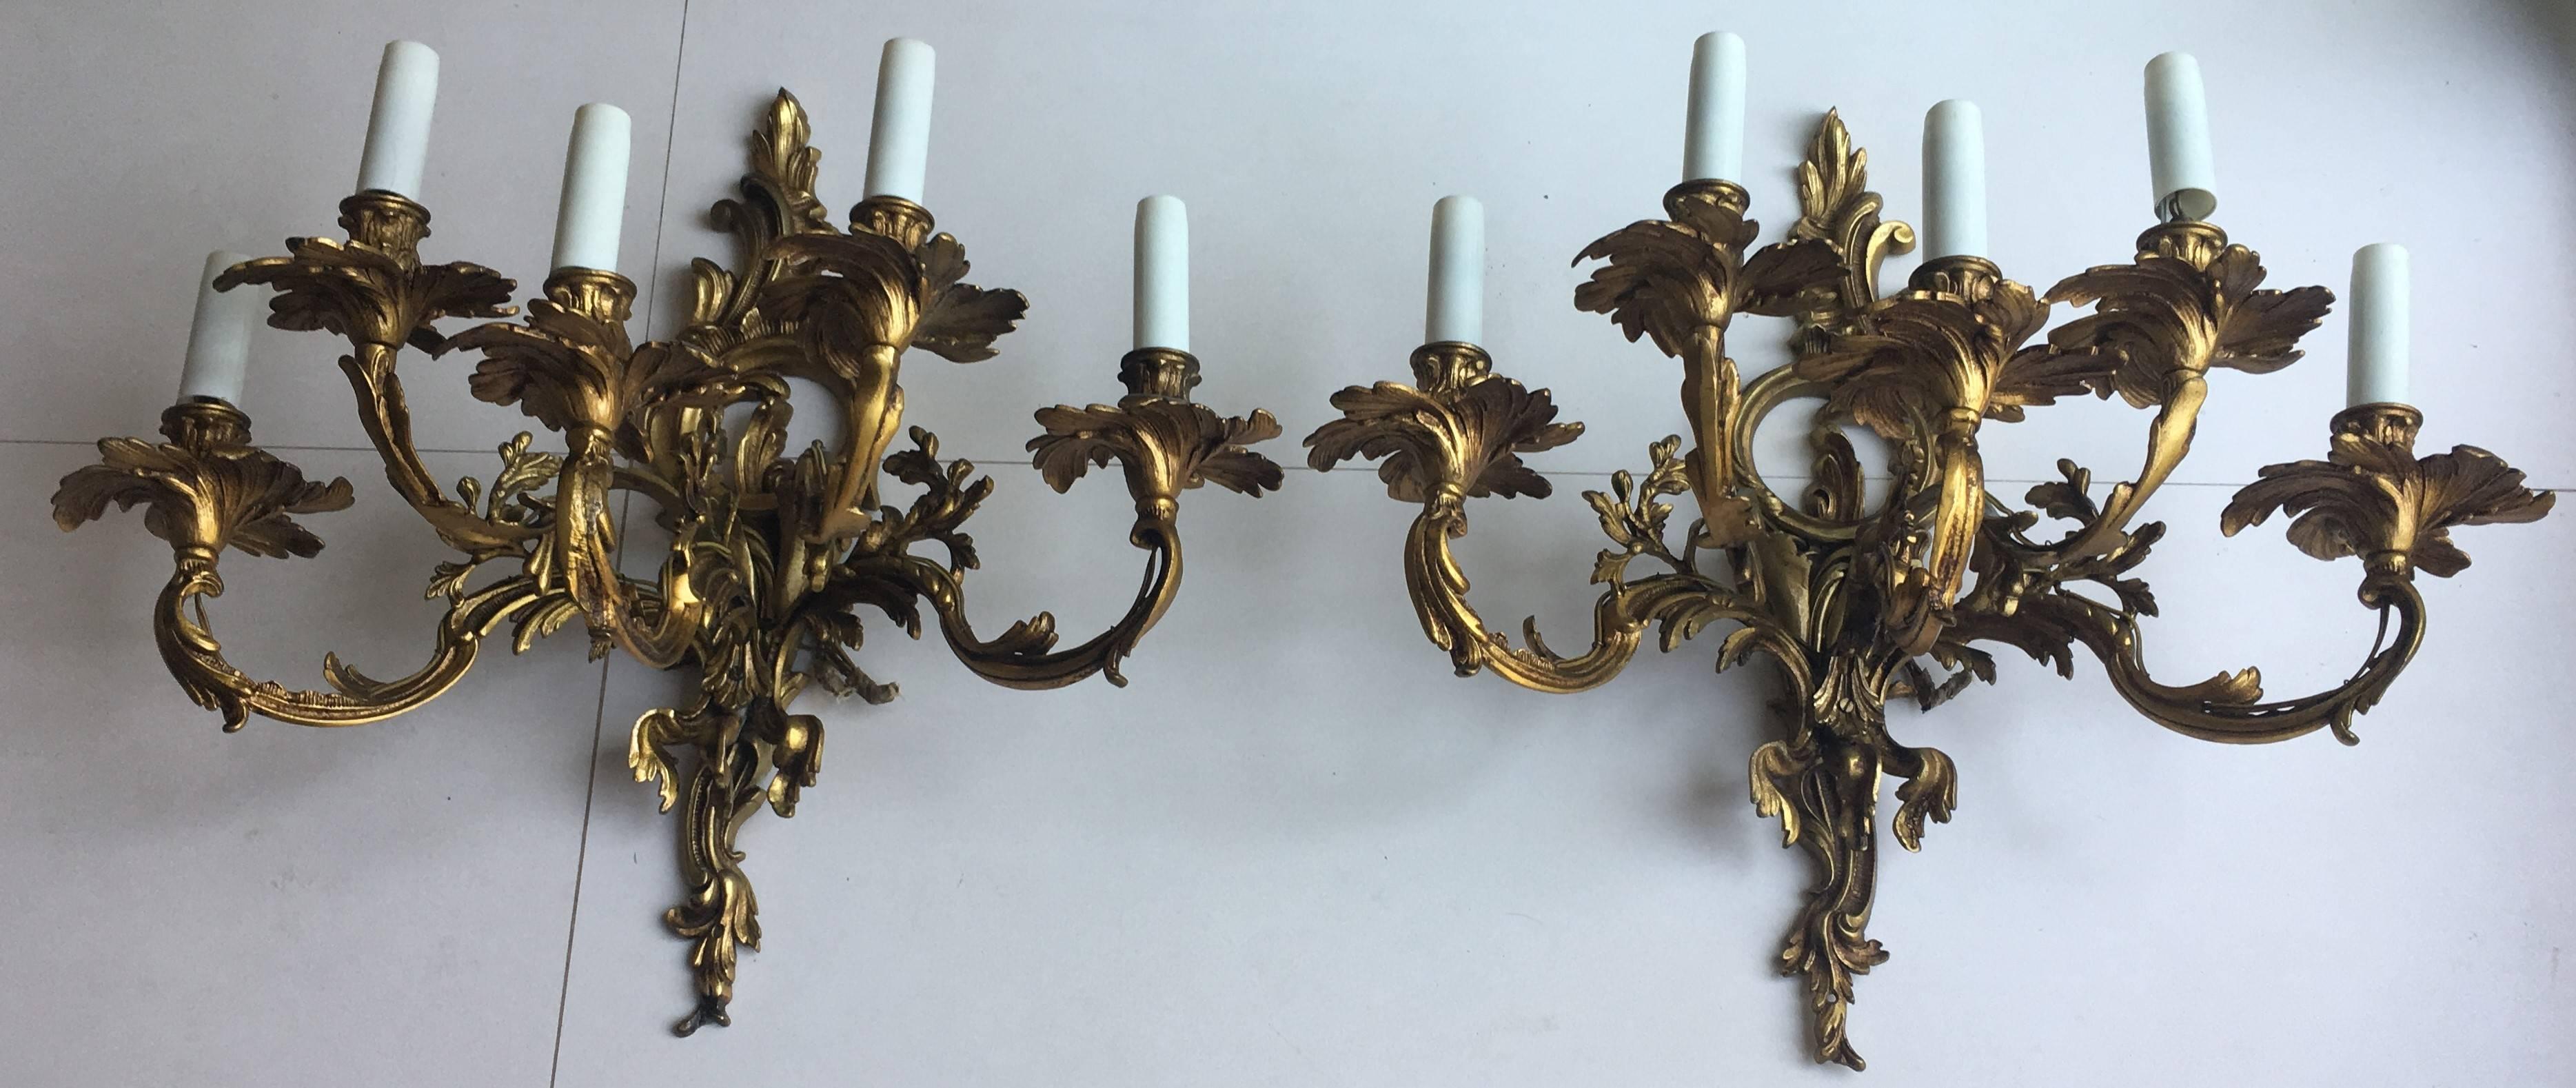 A large French pair of gilded bronze quintuple arm antique wall sconces, the ornate leaf scrolling arms with leaf bobeches drip pans, issuing from a decoratively cast elongated tapering leaf backplate with central cartouche, excellent original